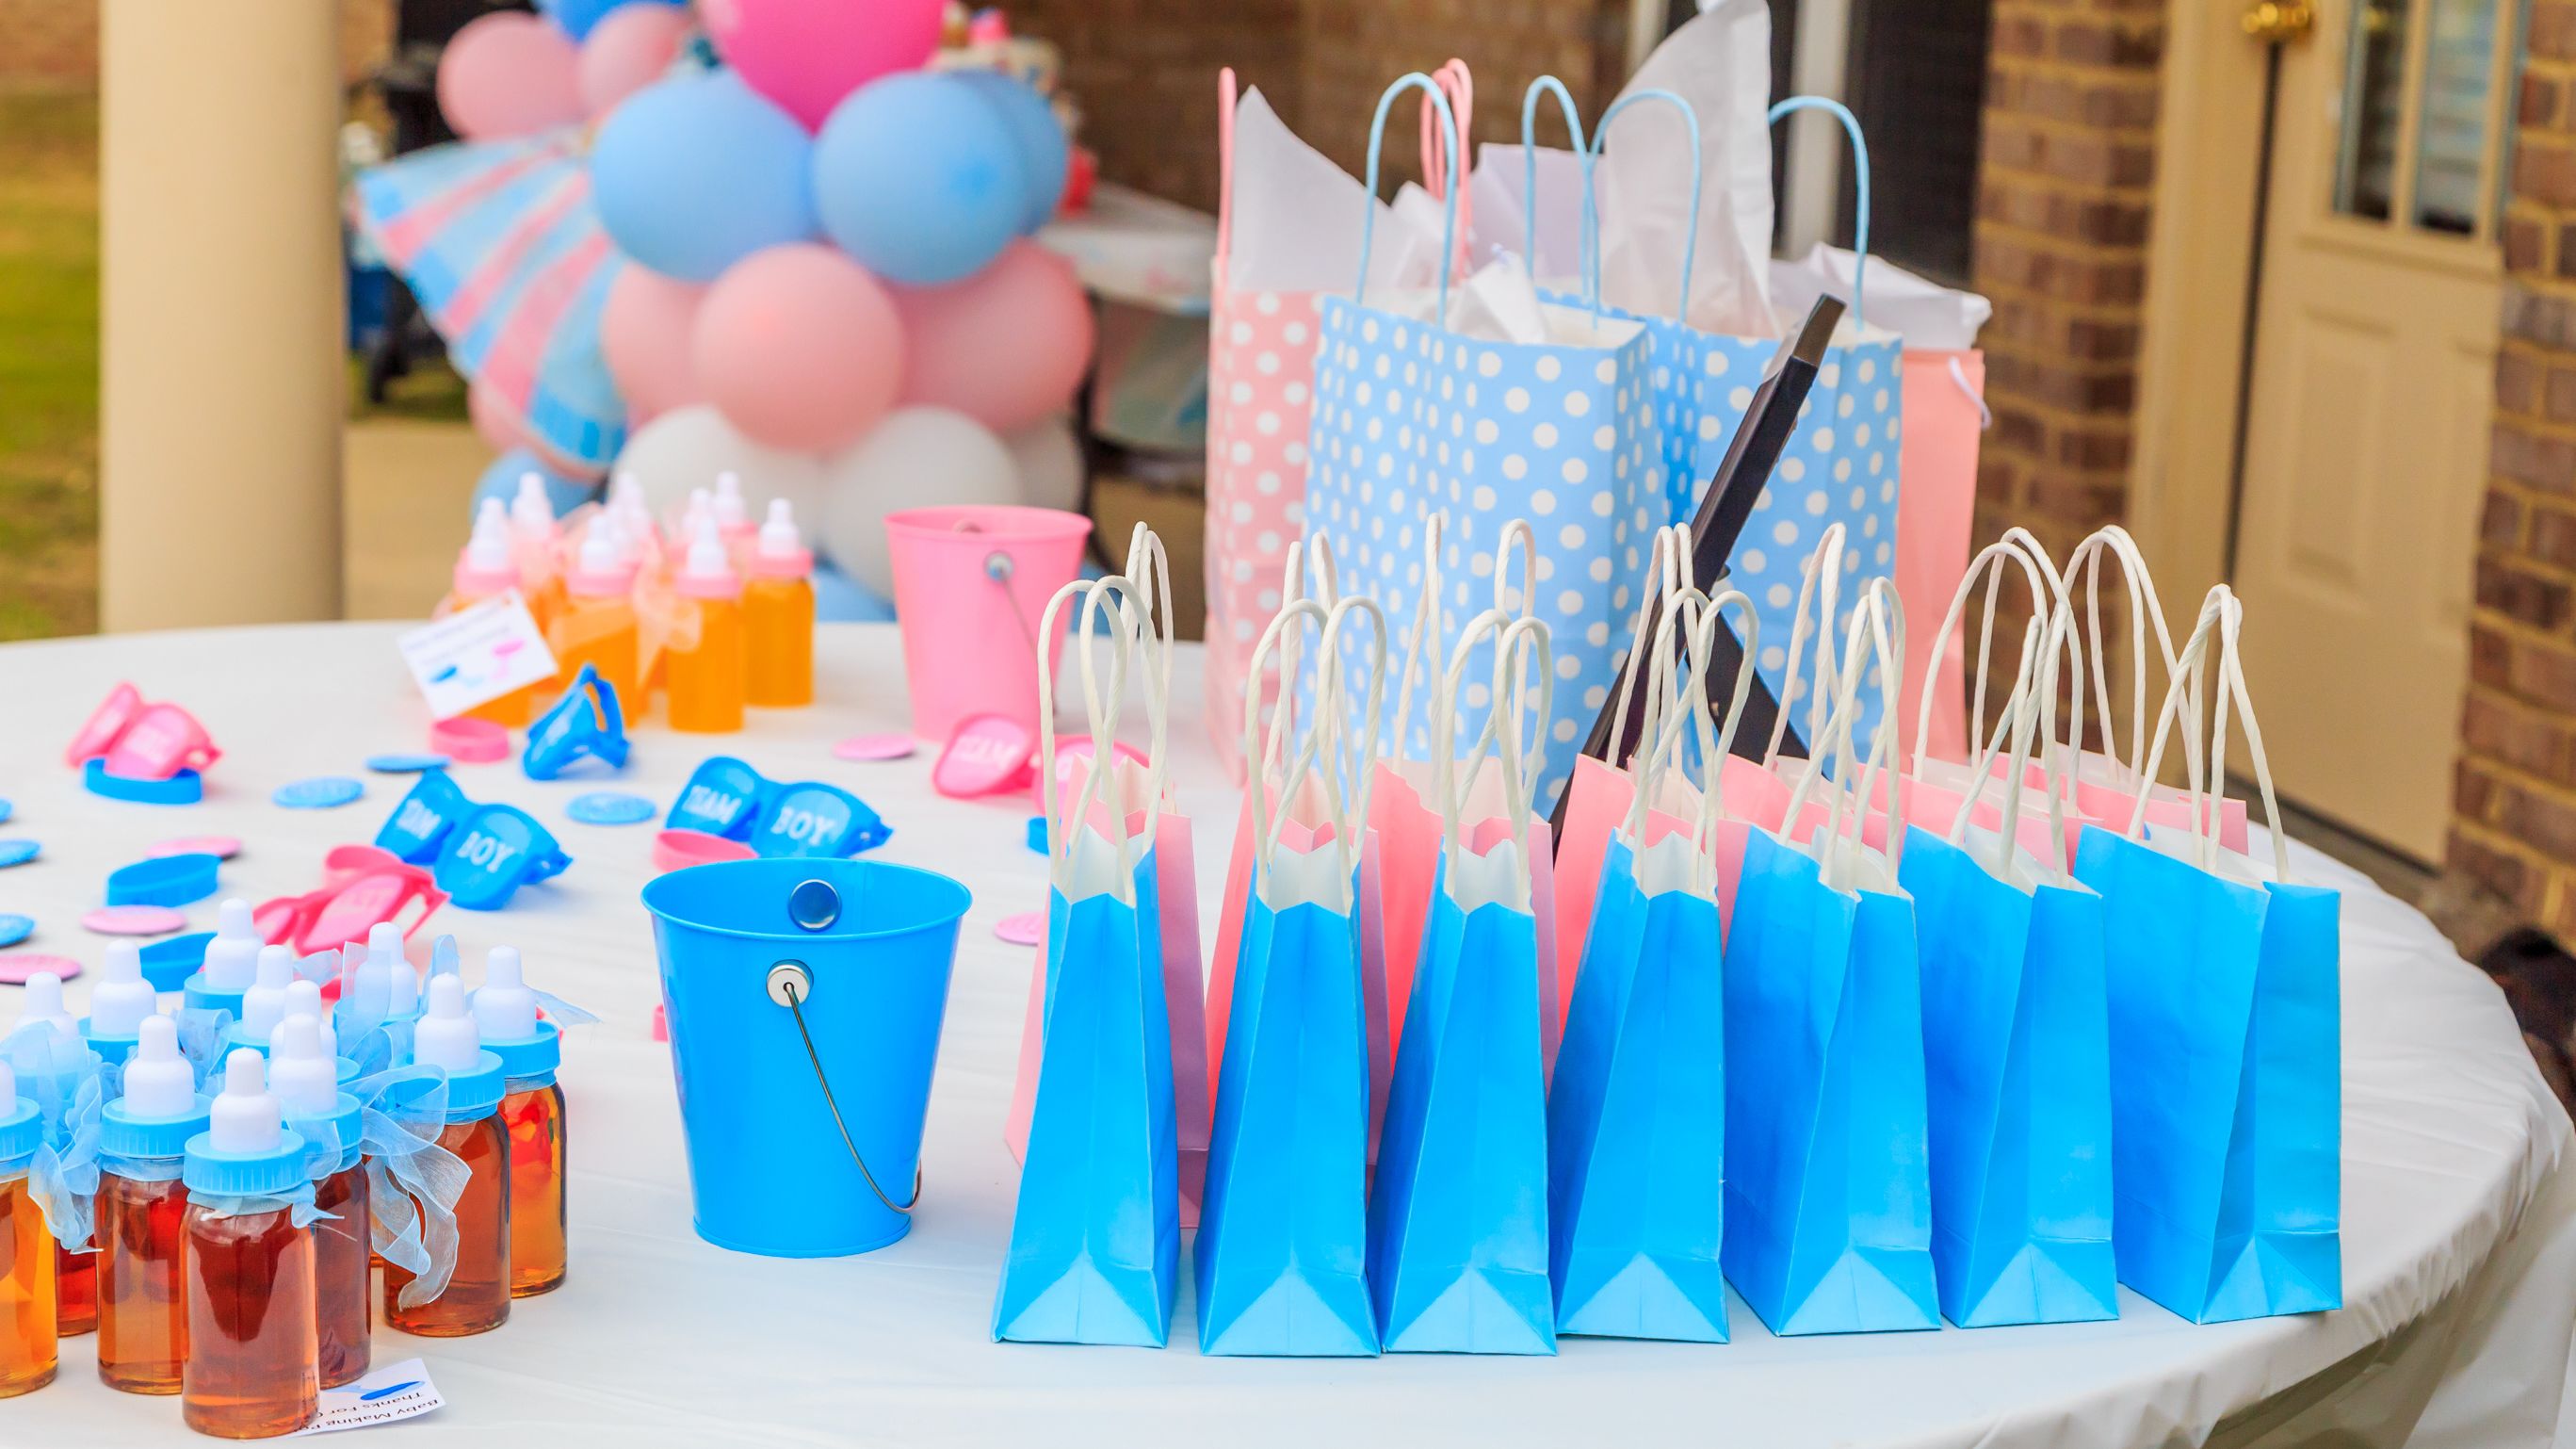 8 Color Powder Games to Liven Up Your Gender Reveal Party - Color